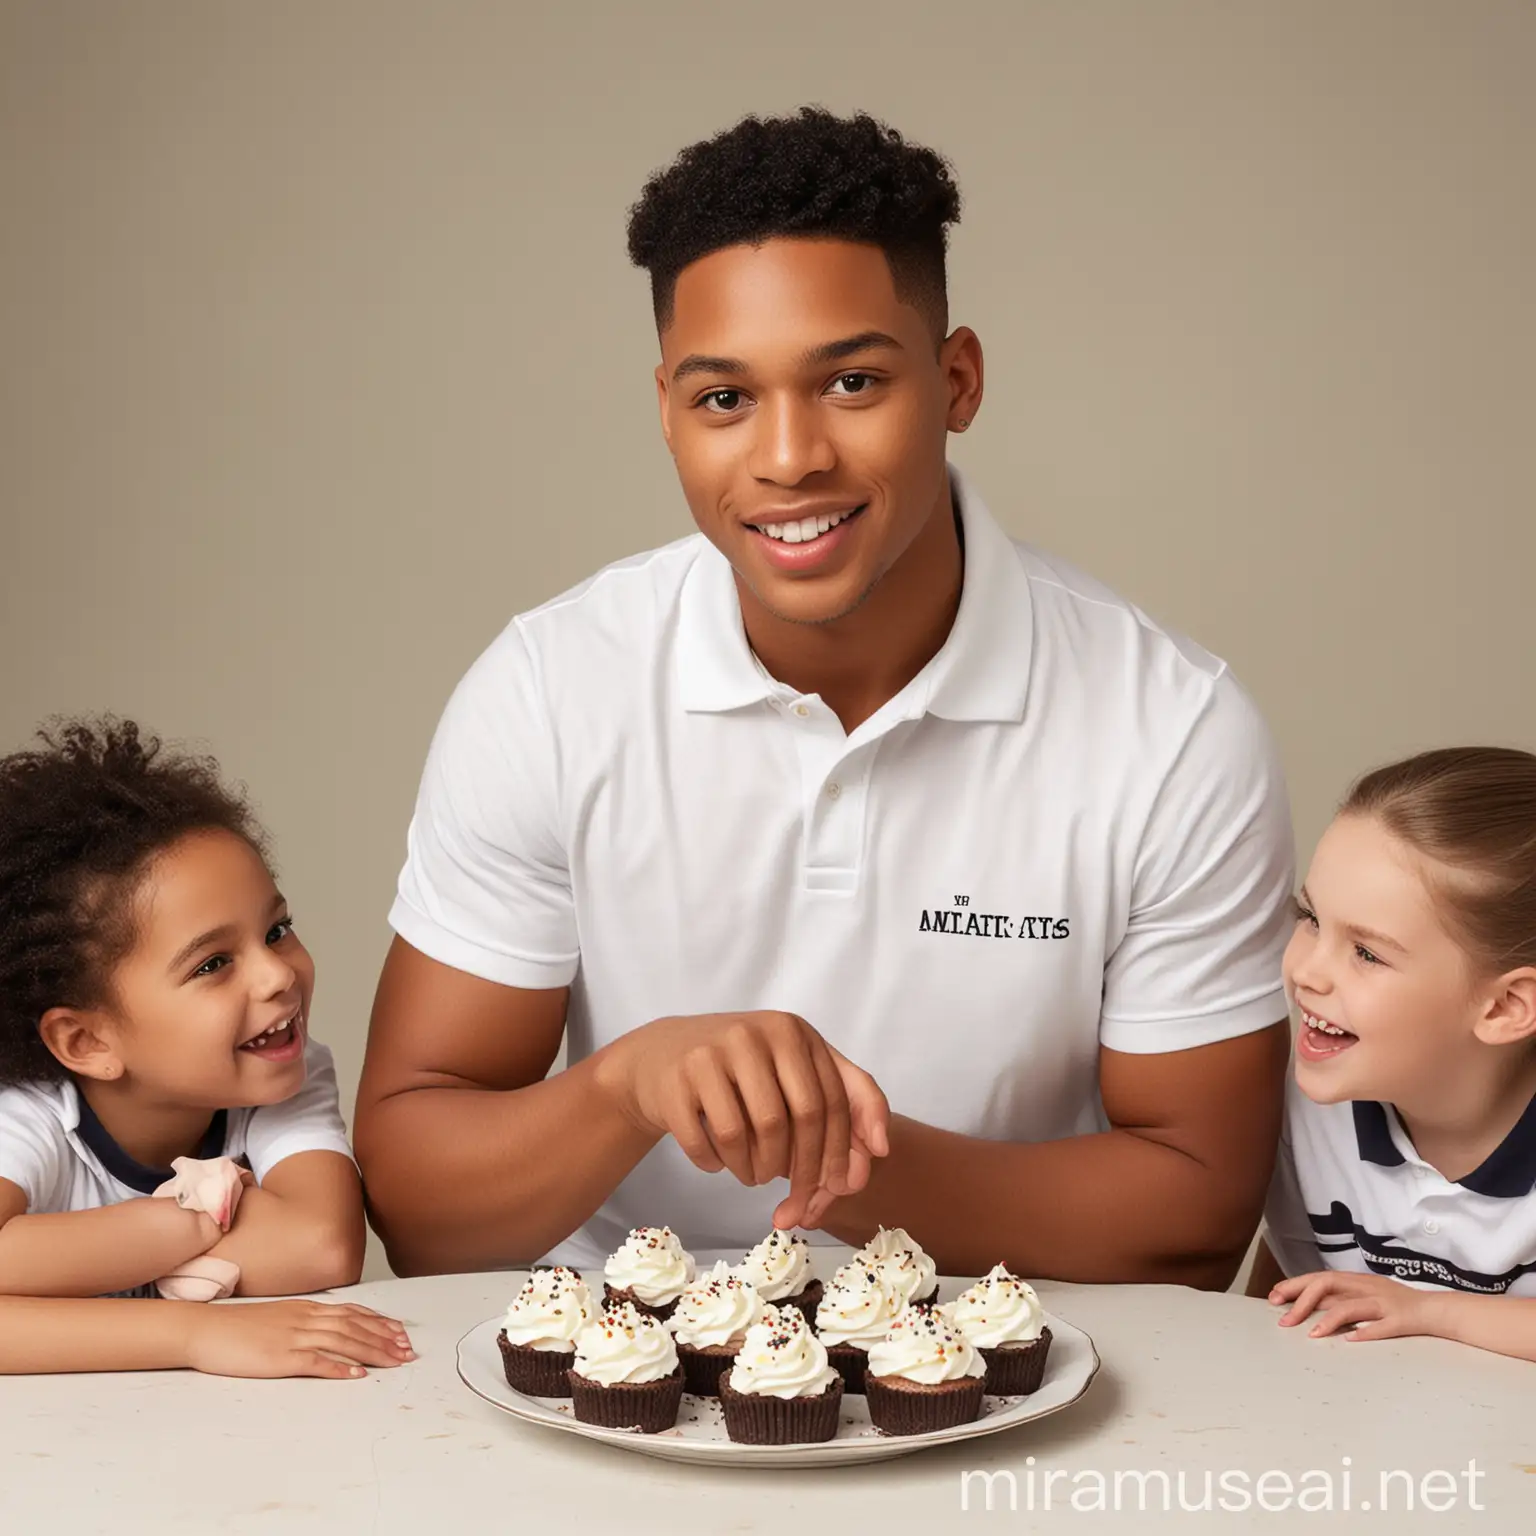 A realistic photo of a young light skin complexion man, dressed in a white polo top, with a word written on it 'mix & treatz,putting on a black trouser, holding a plate of sliced cakes, and a cup of milkshake, standing in front of a group of young kids, sited on a table